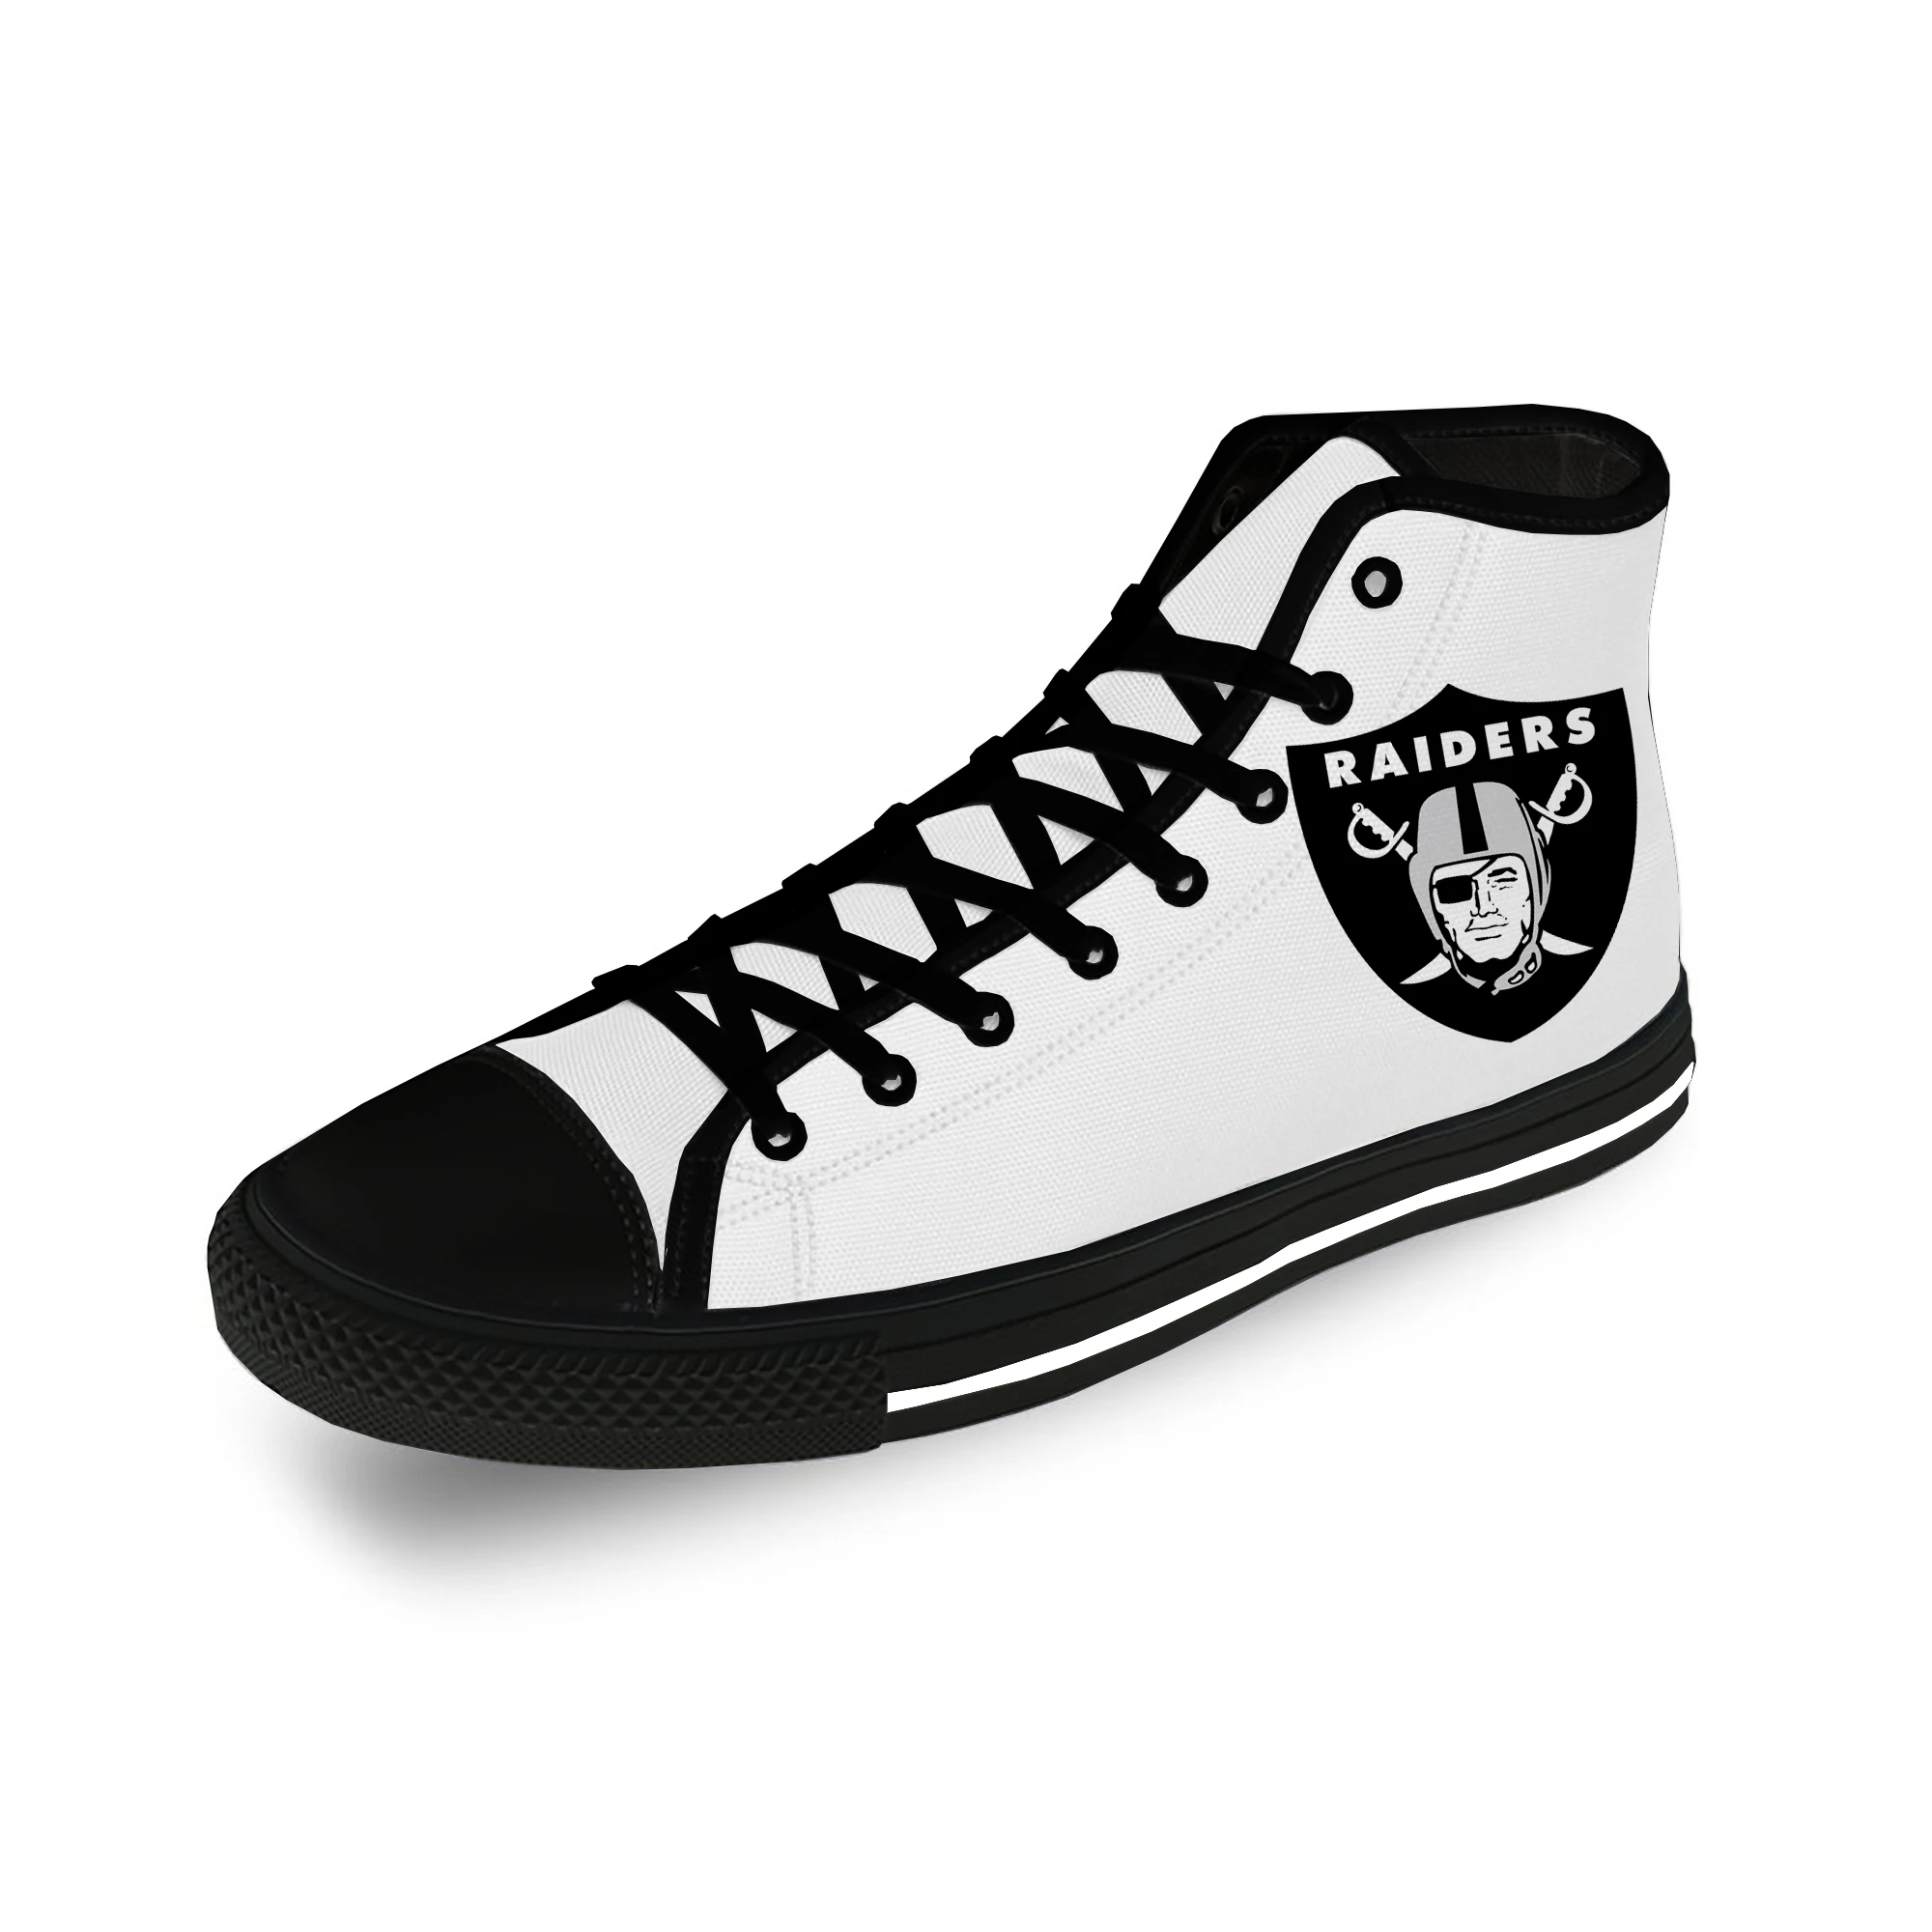 

Las Vegas Raiders High Top Sneakers Mens Womens Teenager Casual Shoes Canvas Running Shoes 3D Print Breathable Lightweight shoe